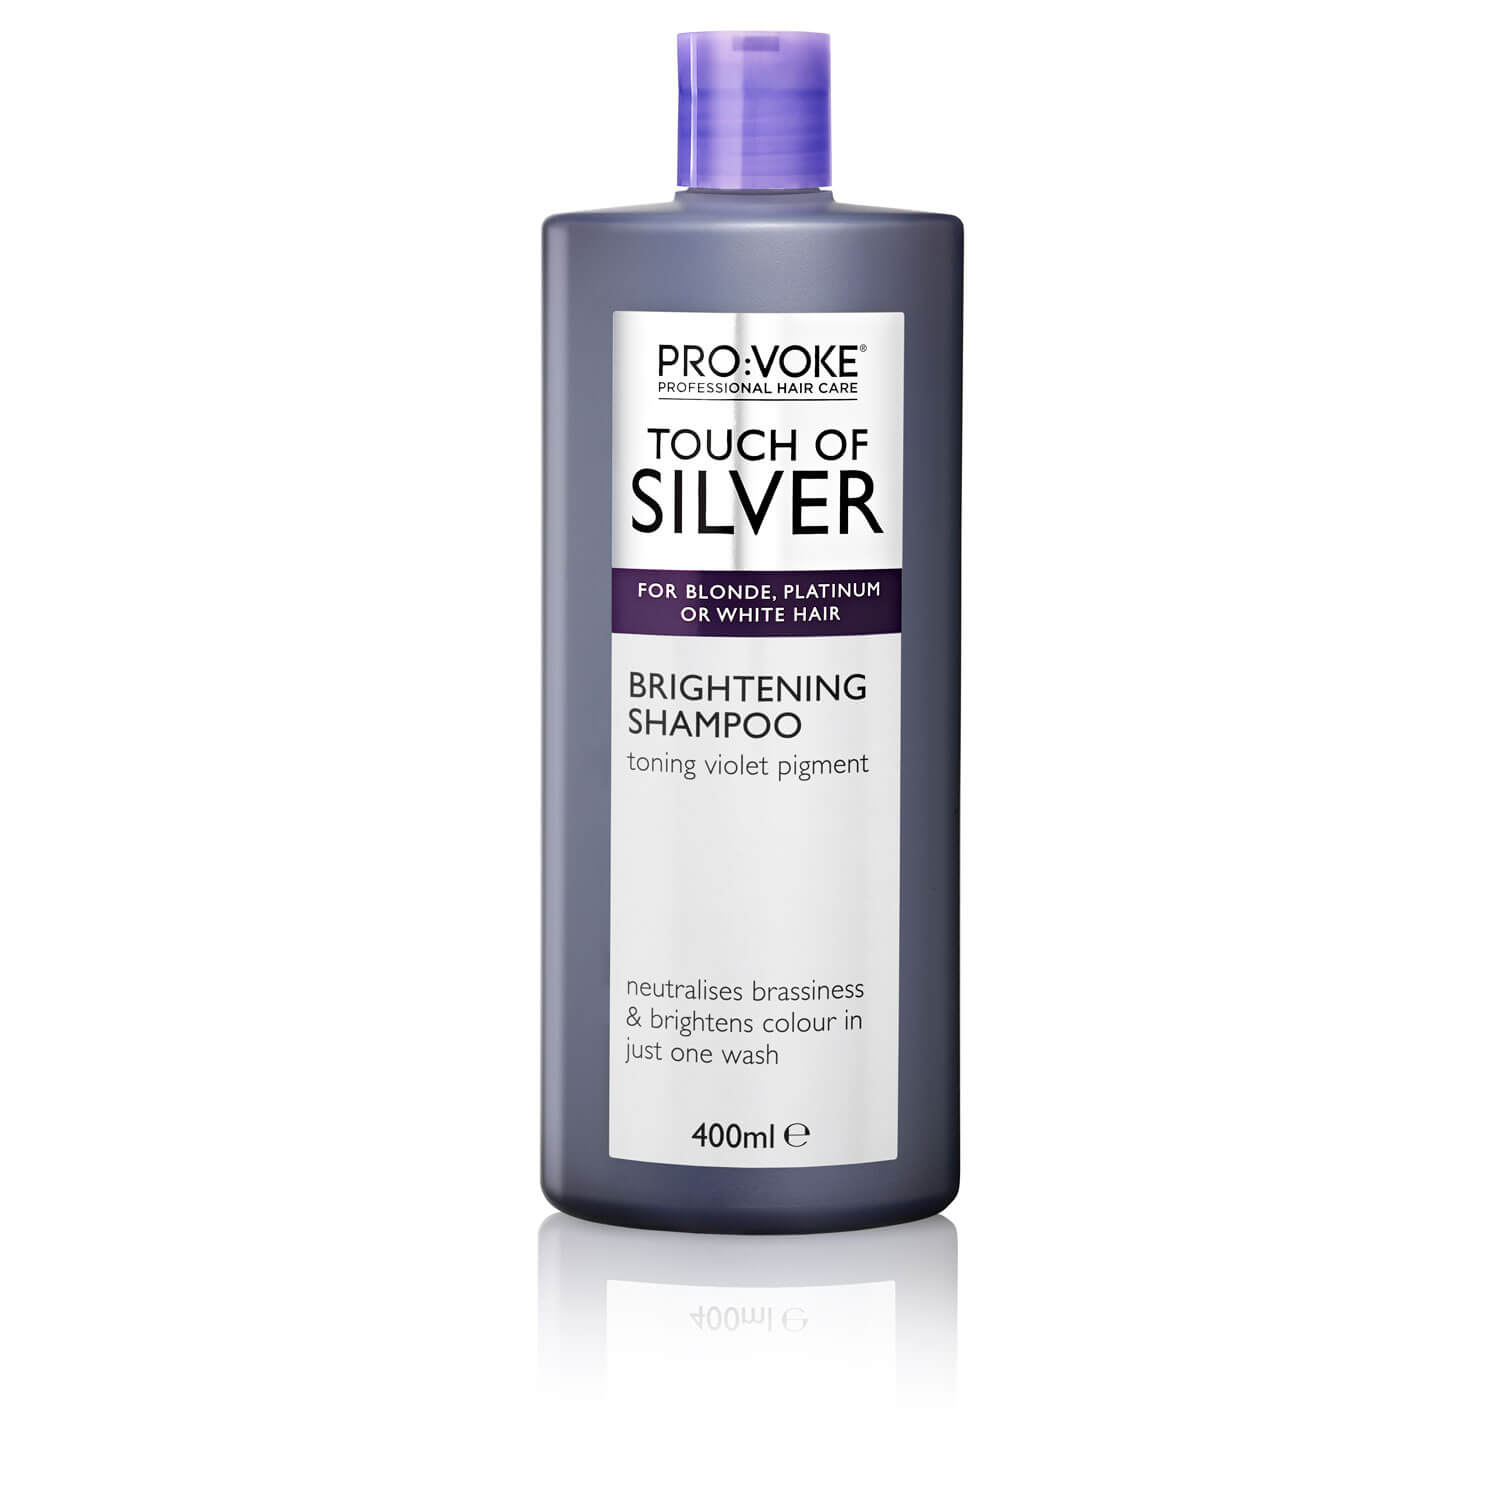 Provoke Touch of Silver Brightening Shampoo 400ml 1 Shaws Department Stores